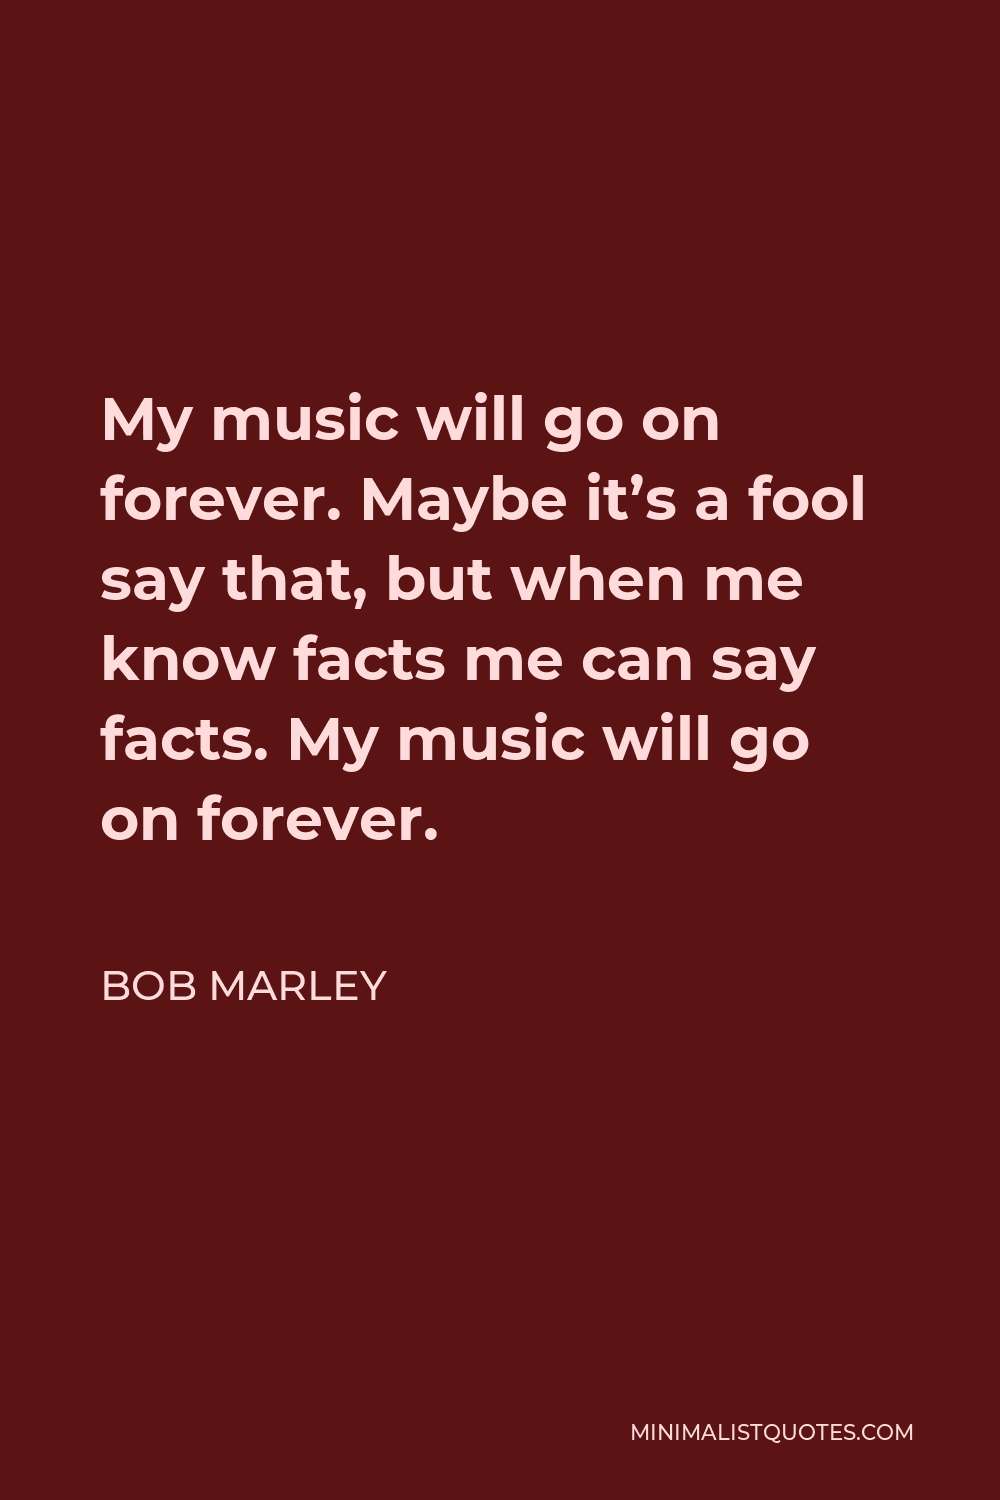 Bob Marley Quote - My music will go on forever. Maybe it’s a fool say that, but when me know facts me can say facts. My music will go on forever.